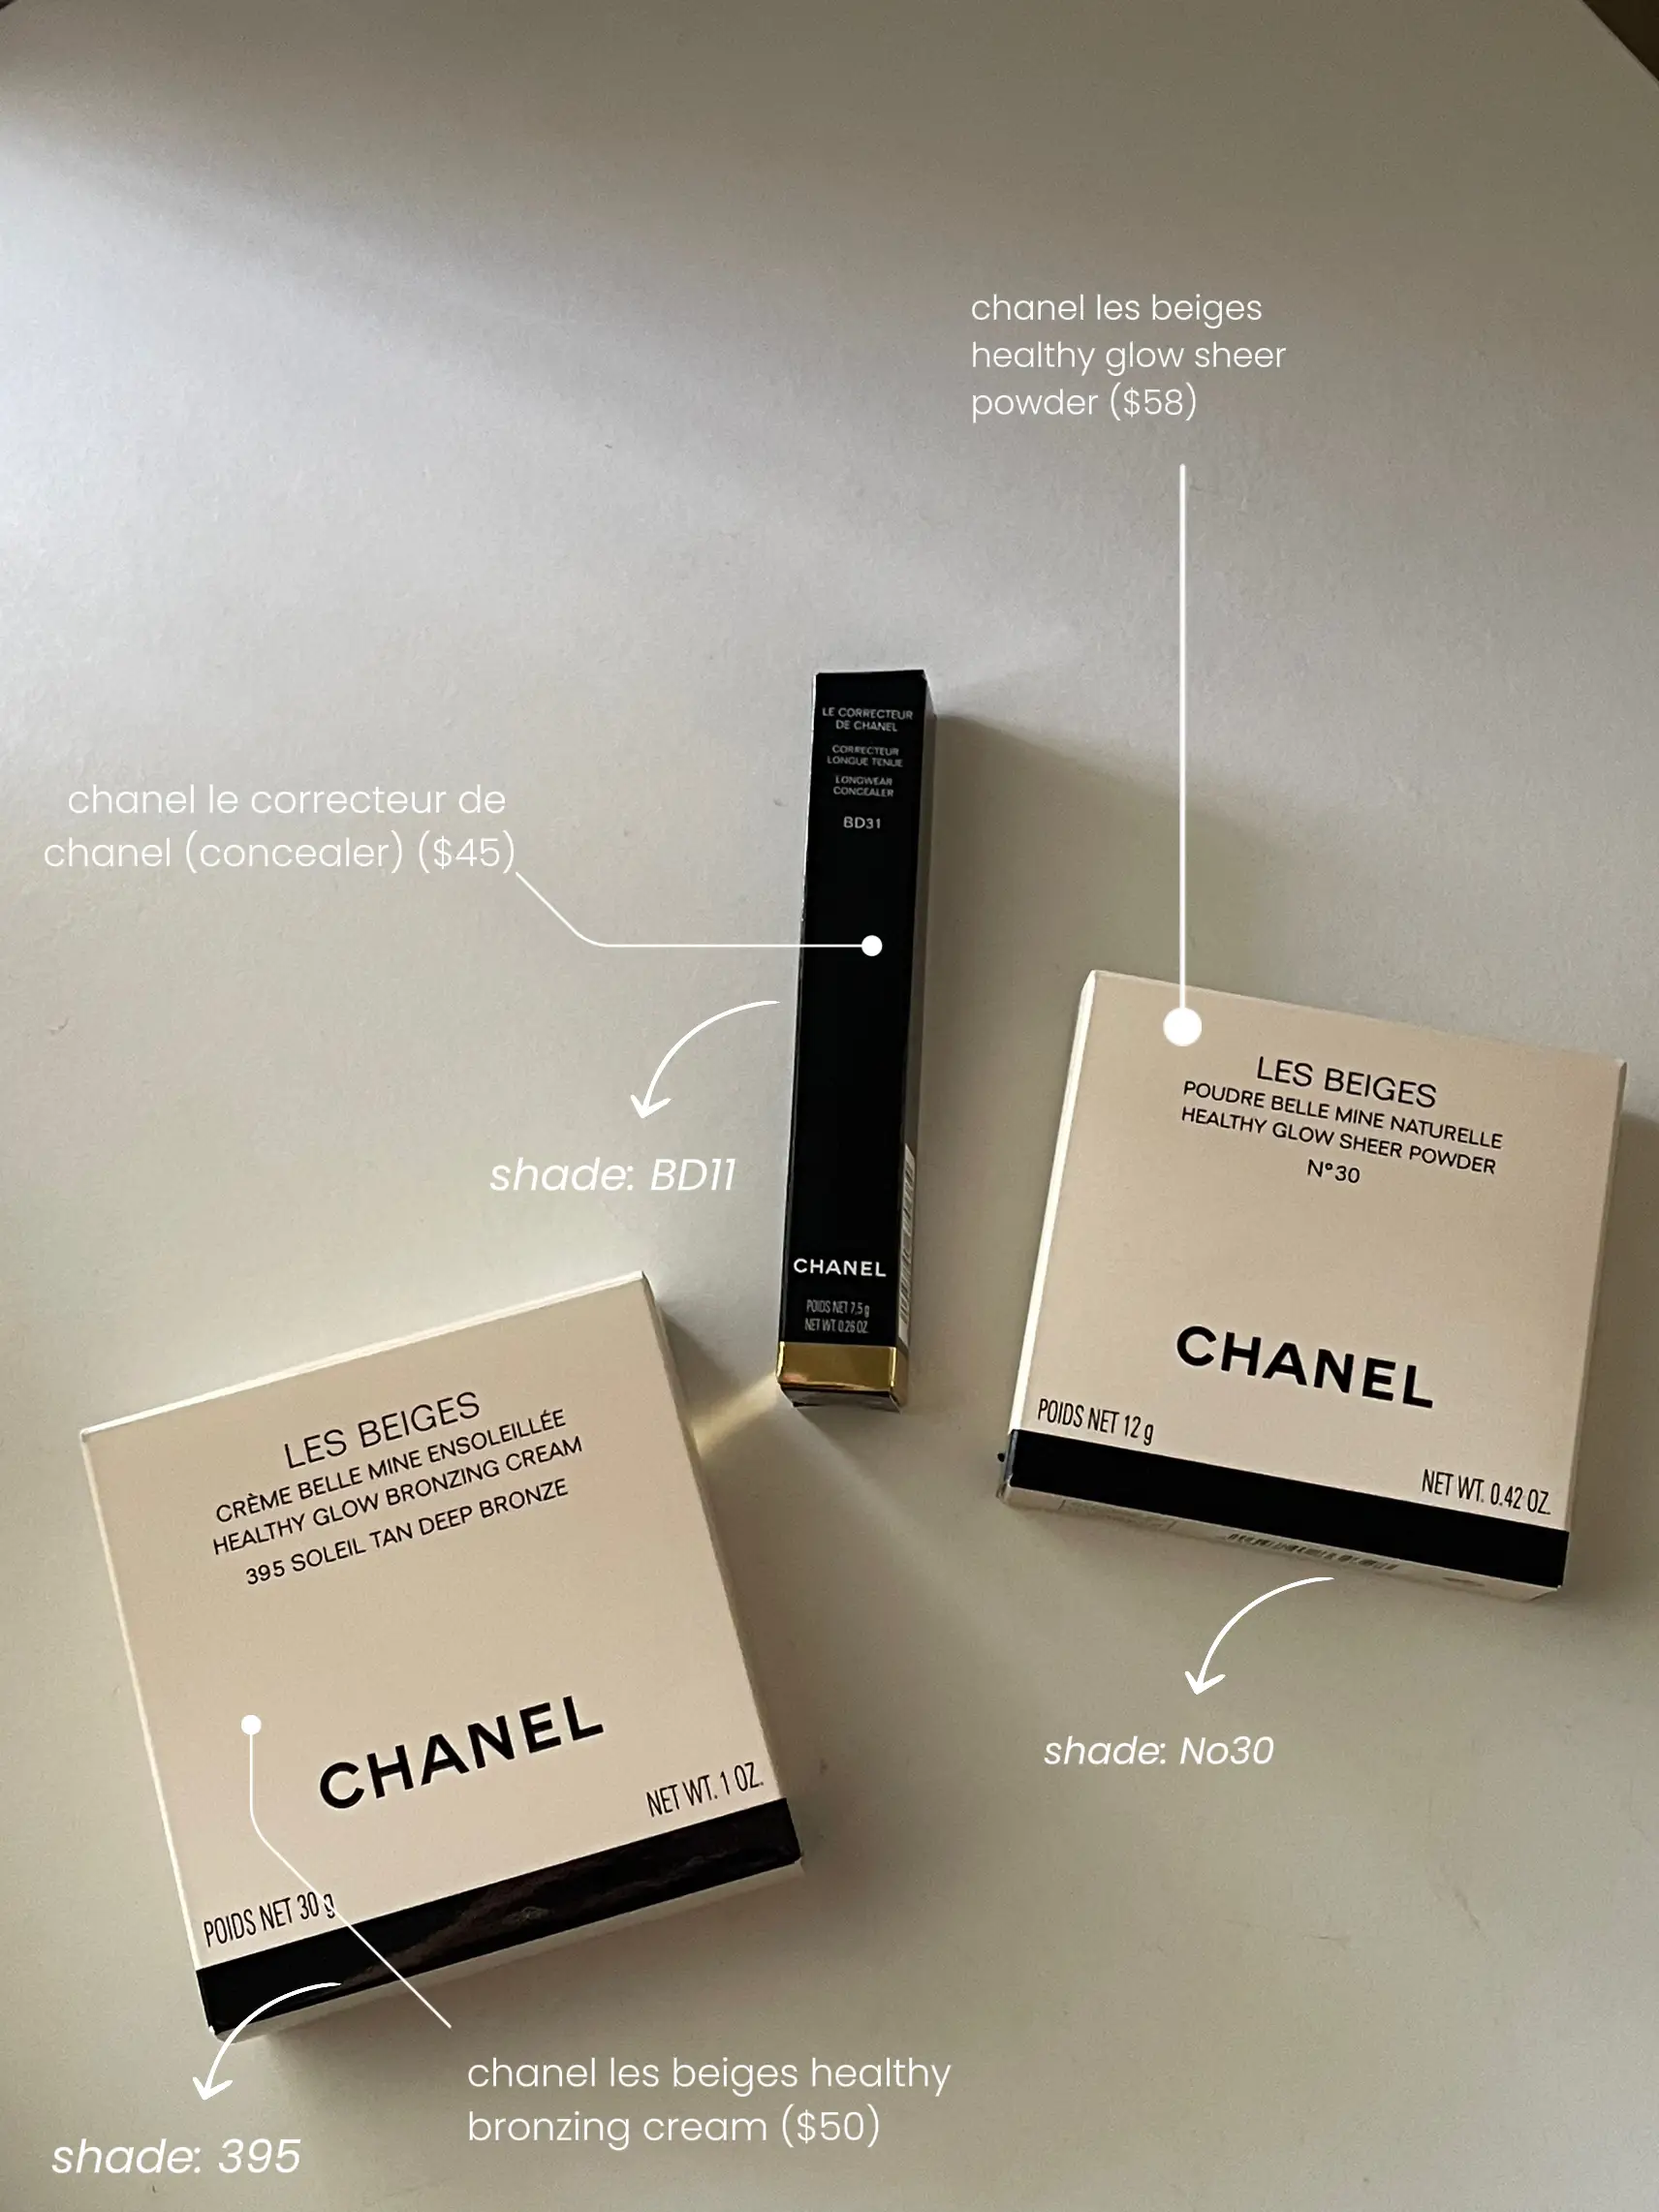 Unbox Chanel Makeup with me!  Gallery posted by neha jiandani